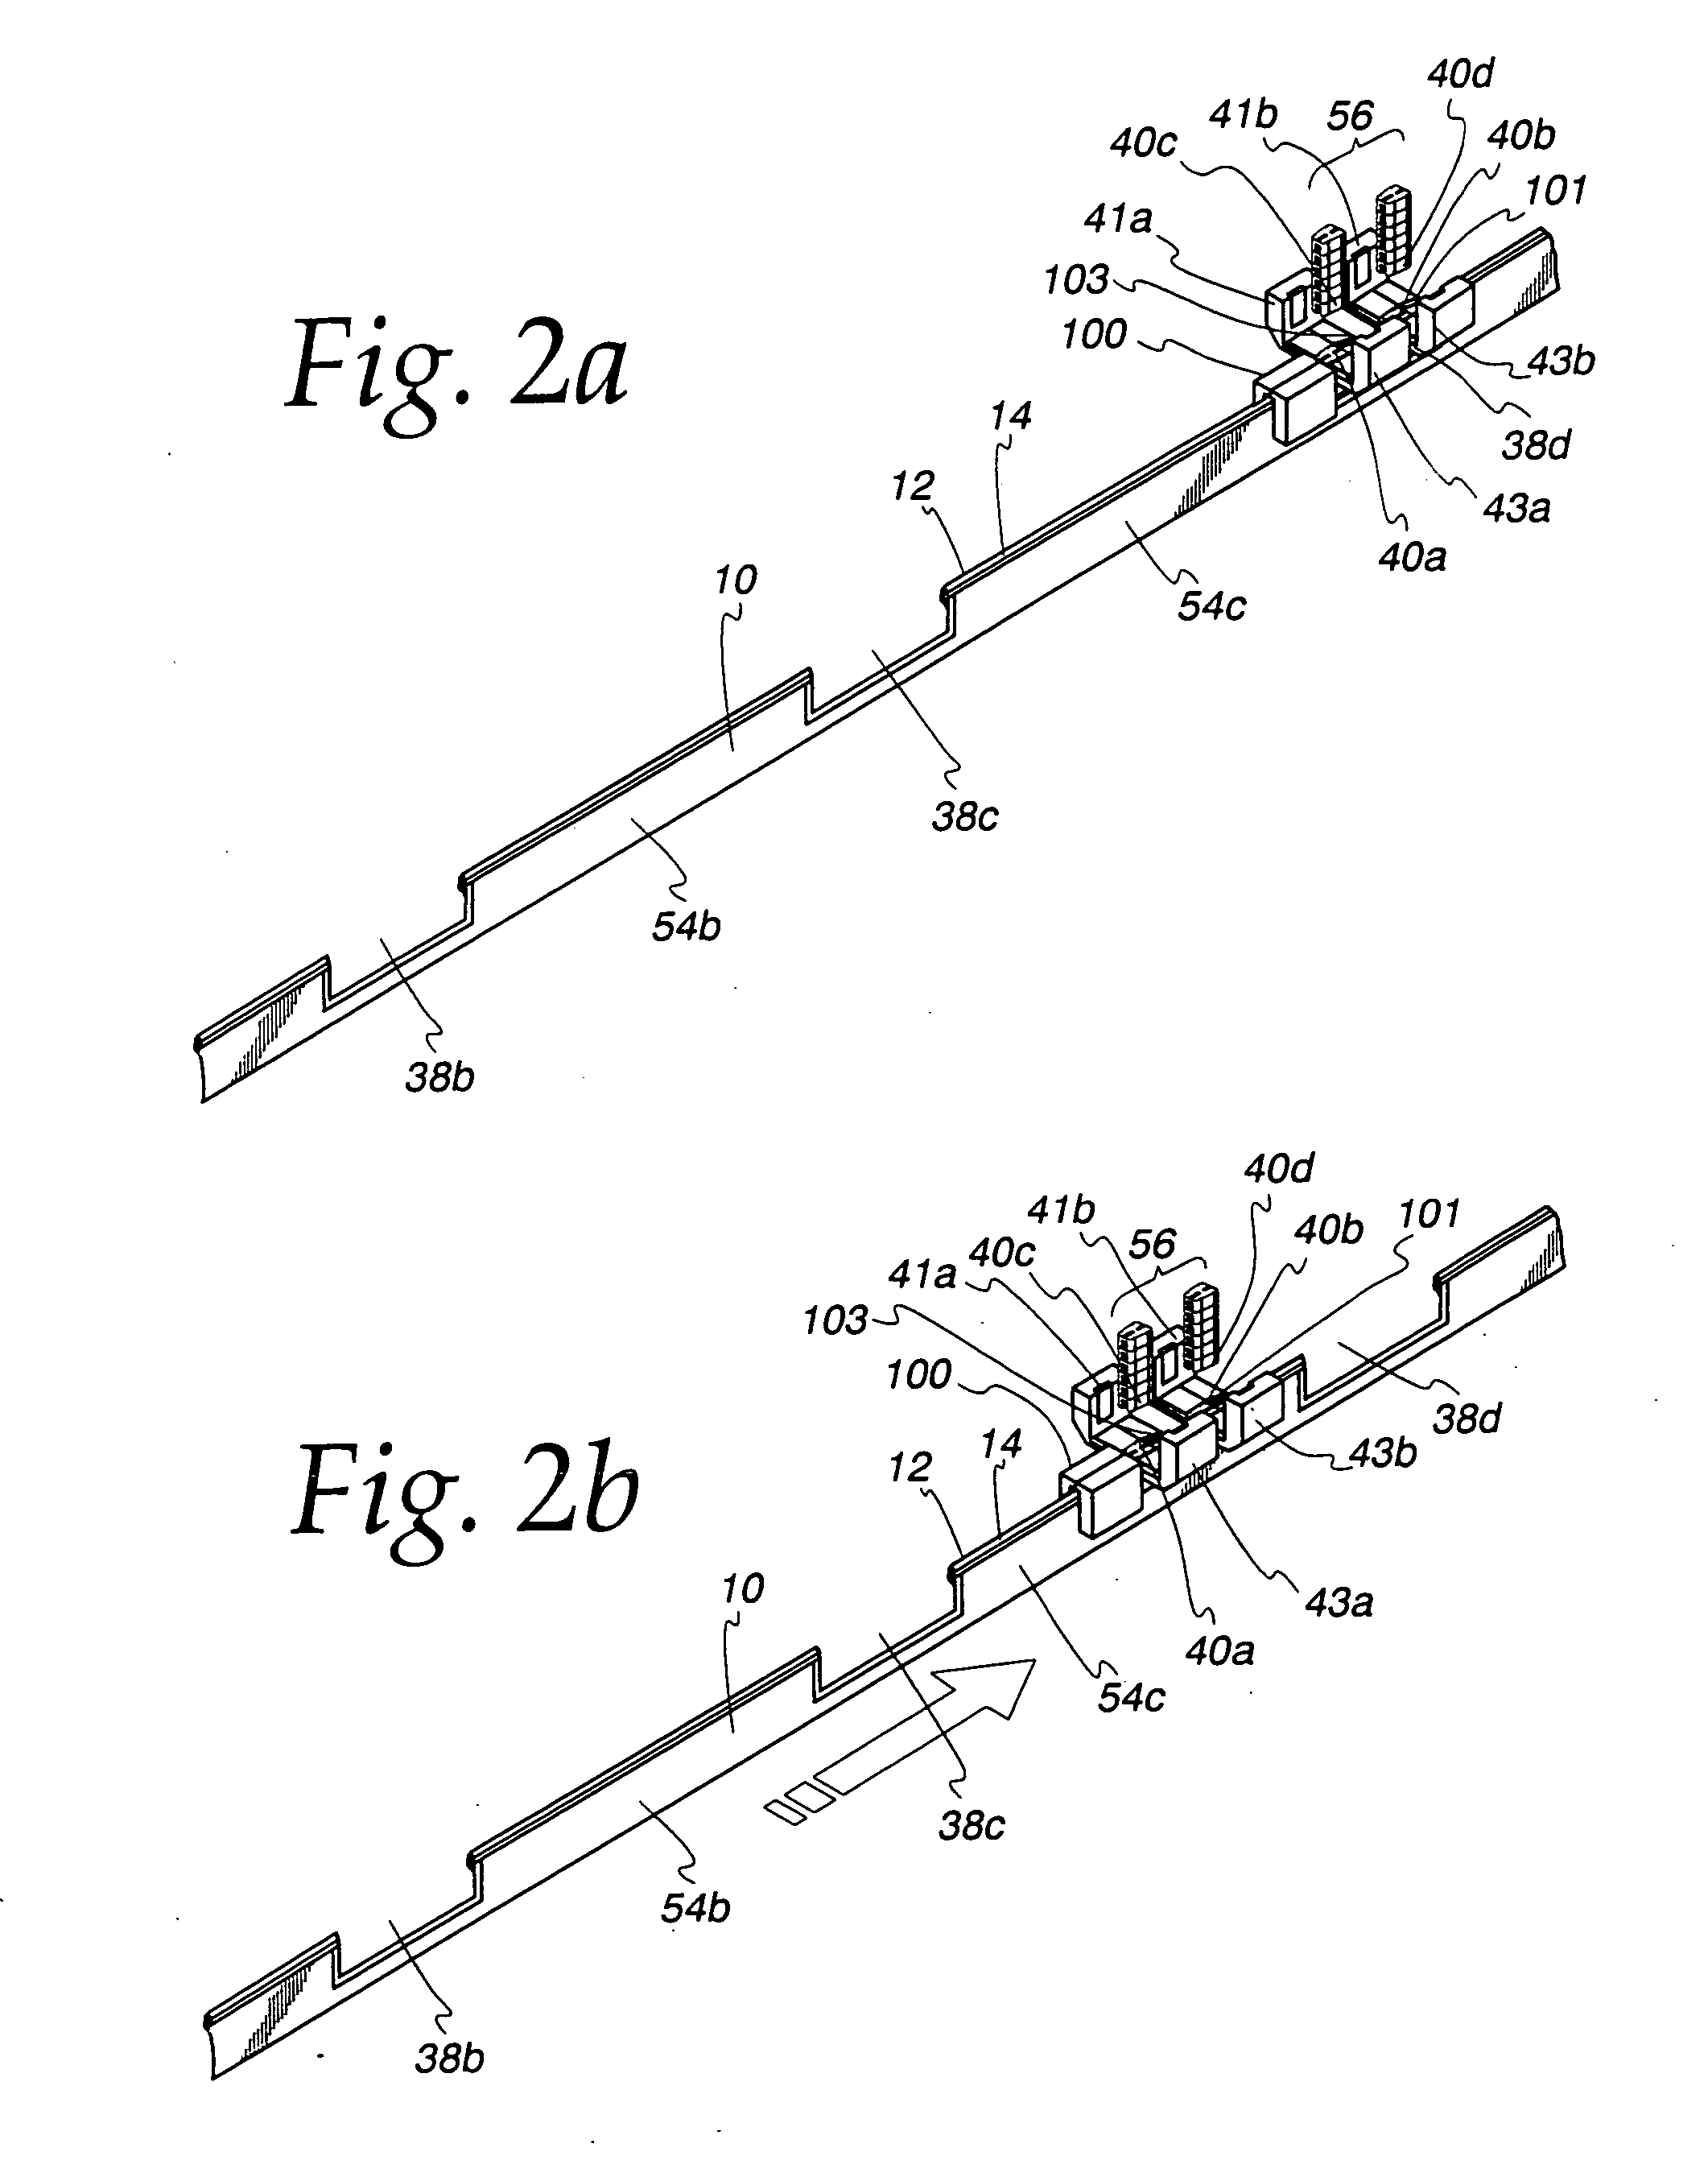 Methods for applying sliders to reclosable plastic bags